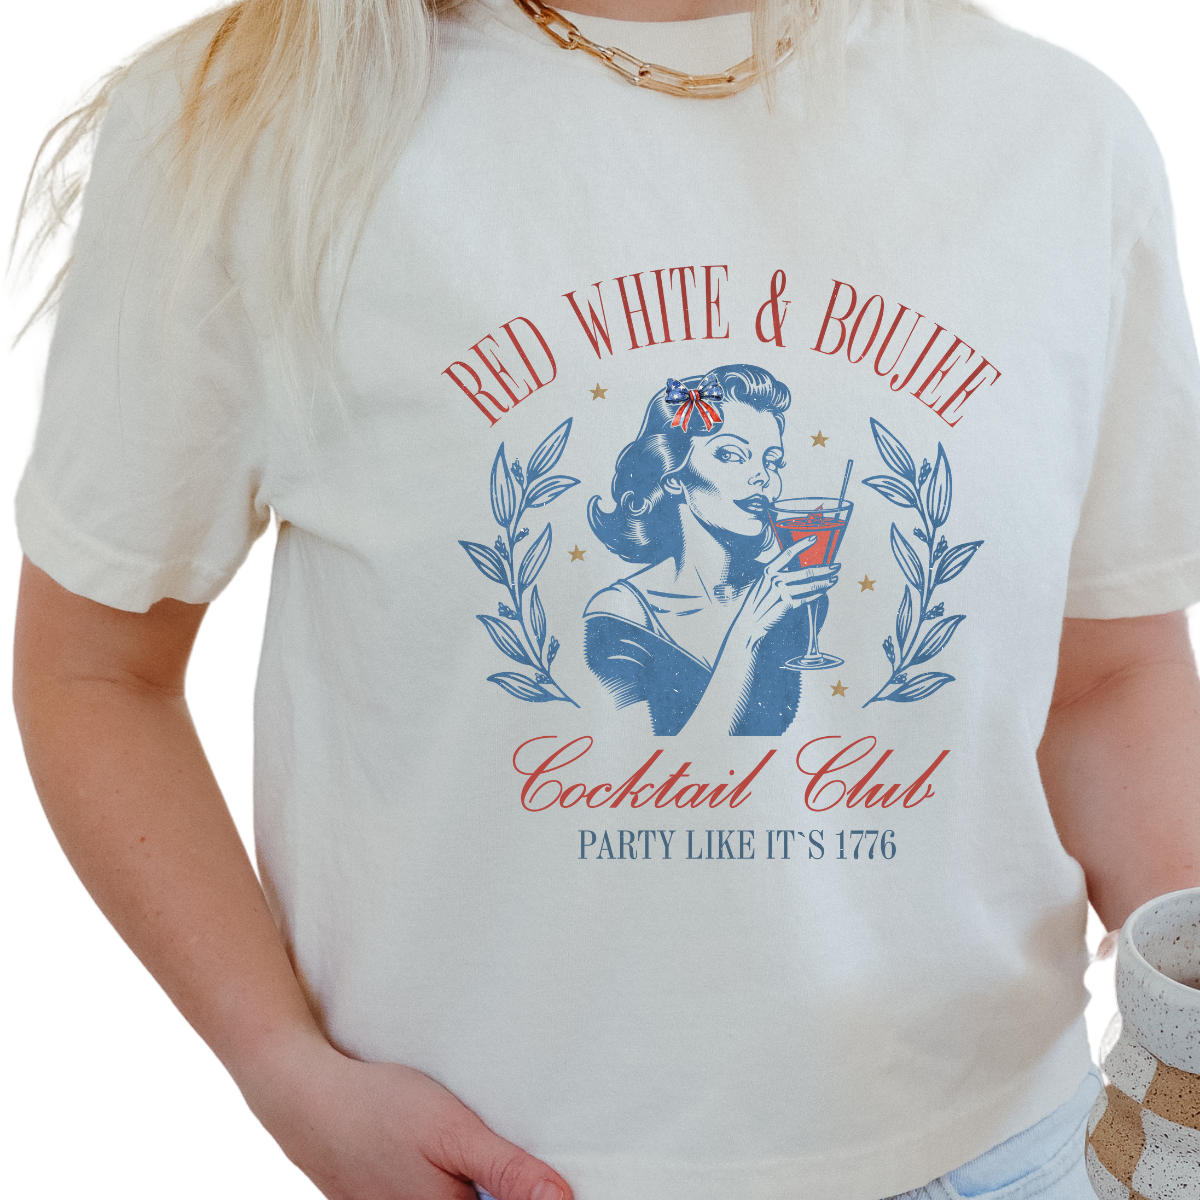 Red White & Boujee Cocktail Club, Party Like it's 1776